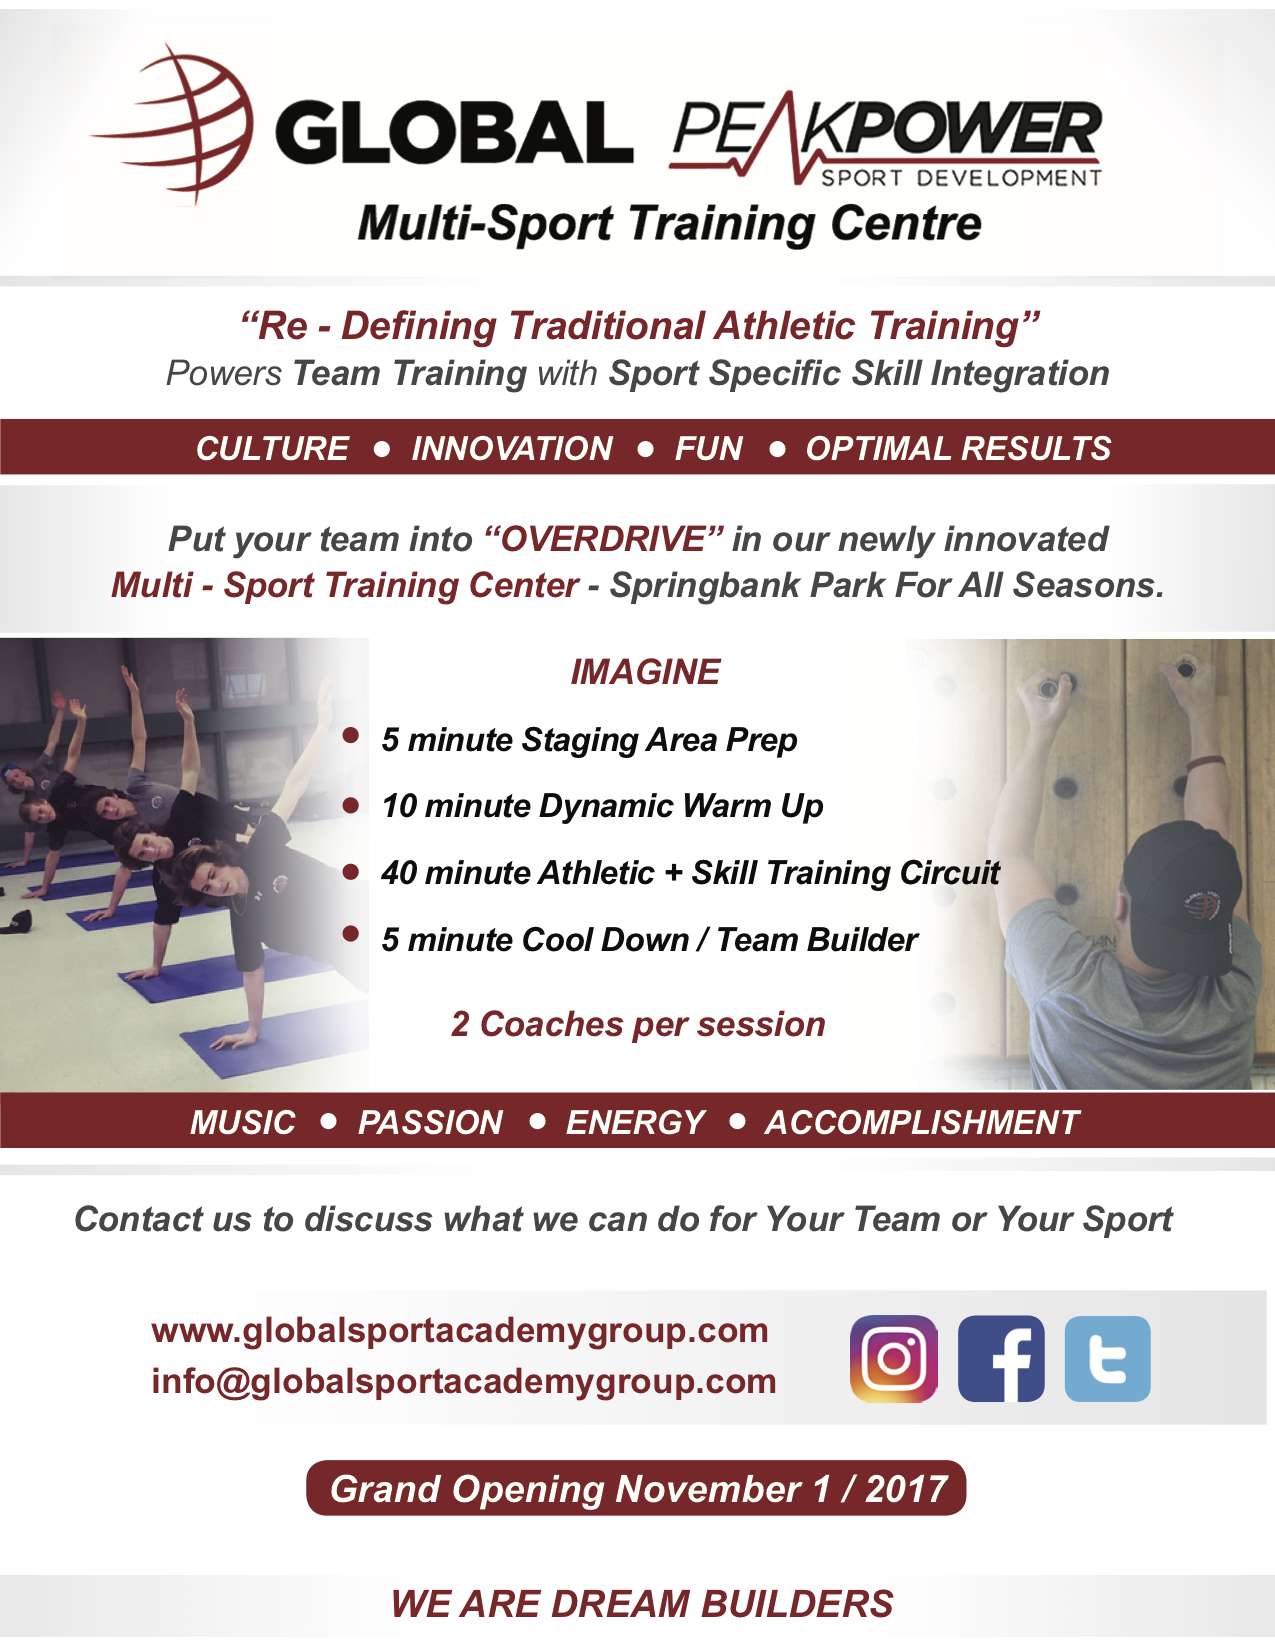 Global and Peak Power Training Facility Poster